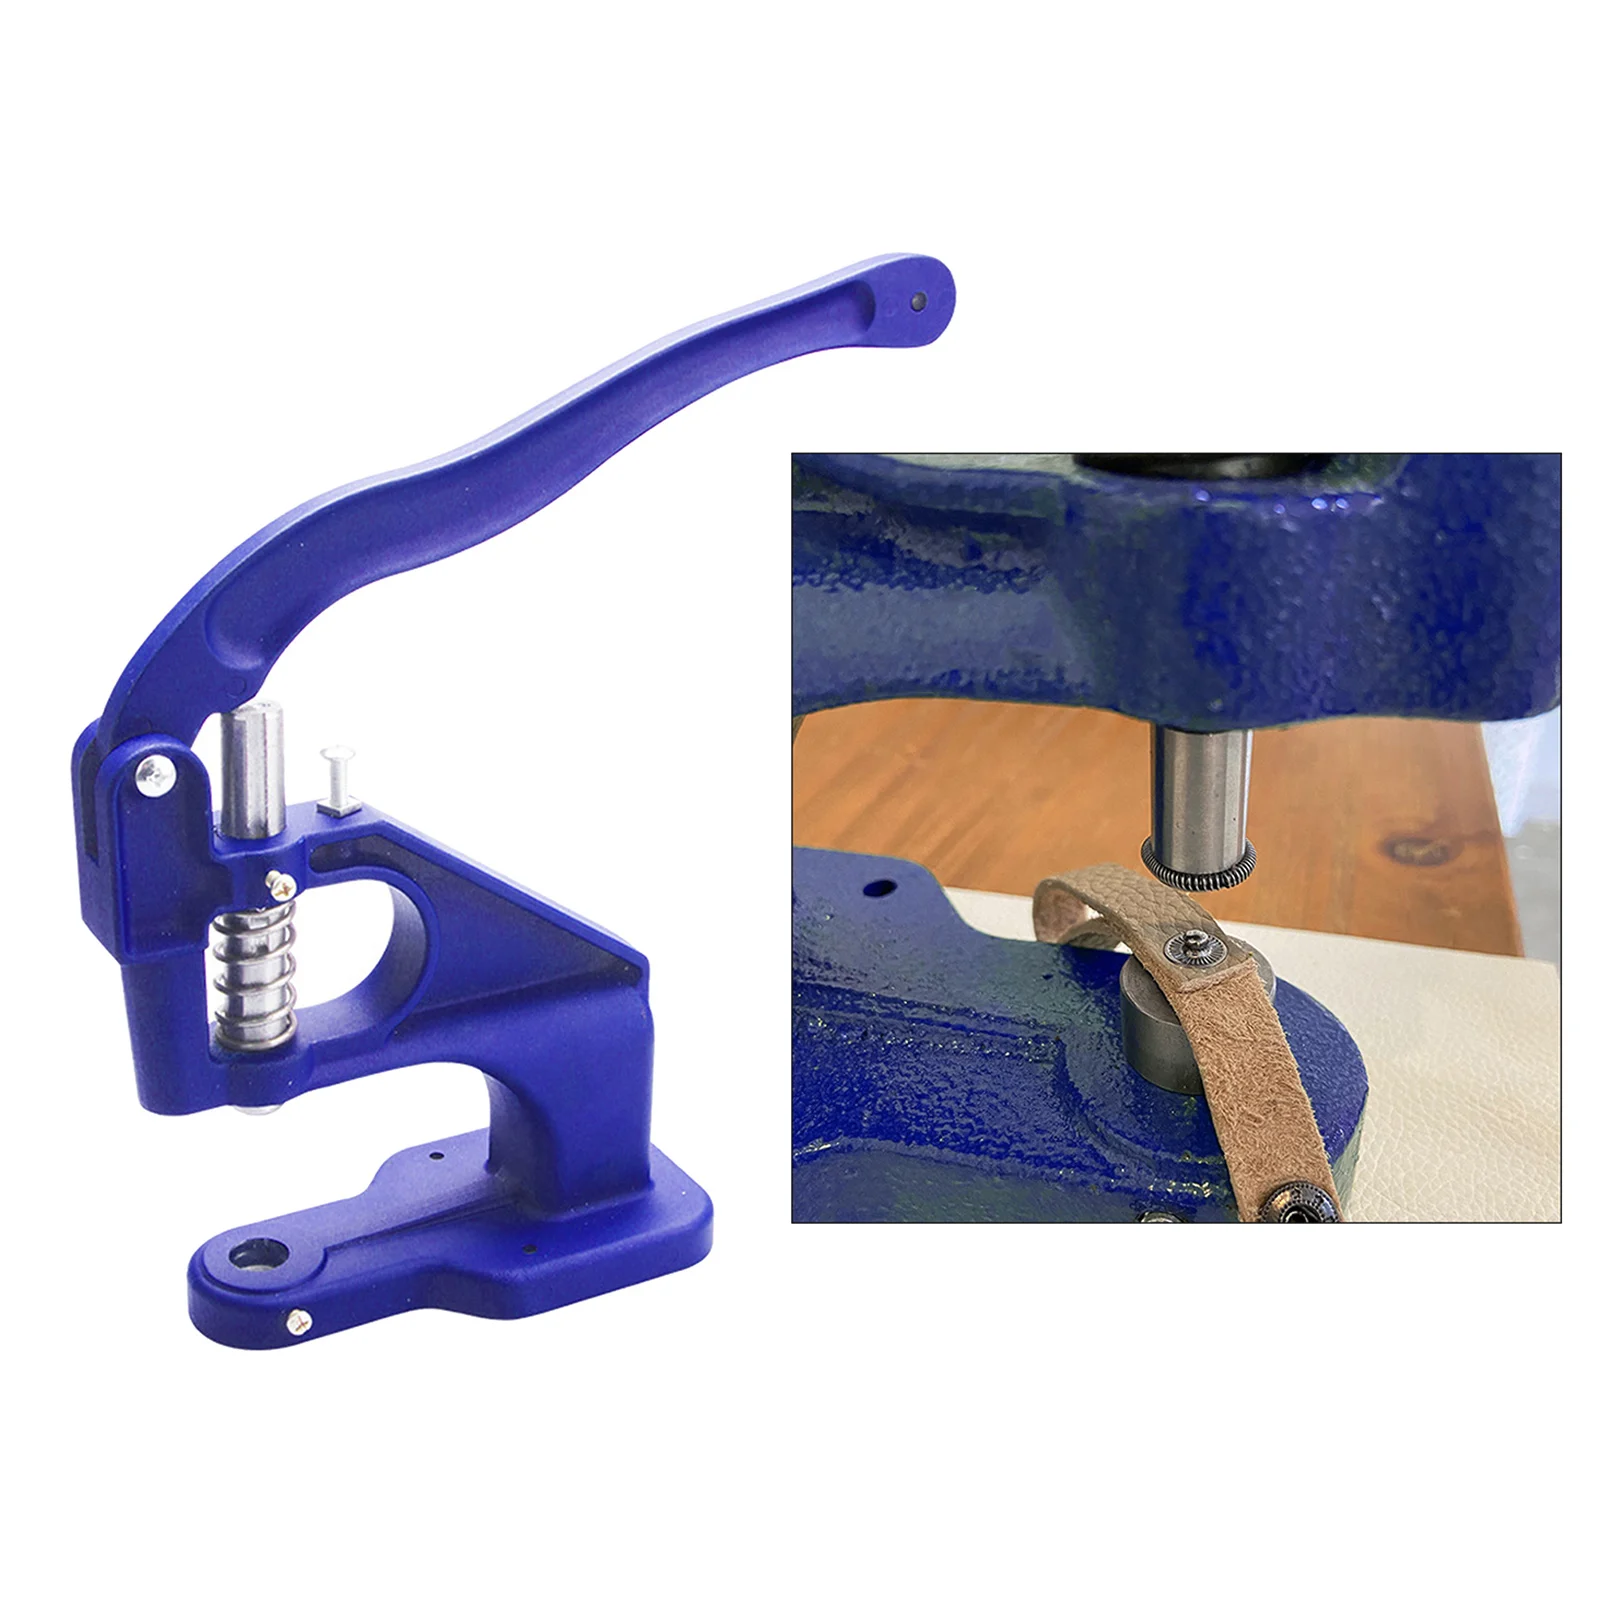 Grommet Eyelet Machine Punch Manual Installation Tool Hand Press Sew Pressing Clamp Machine DIY Manual Snap Buttons Pressing